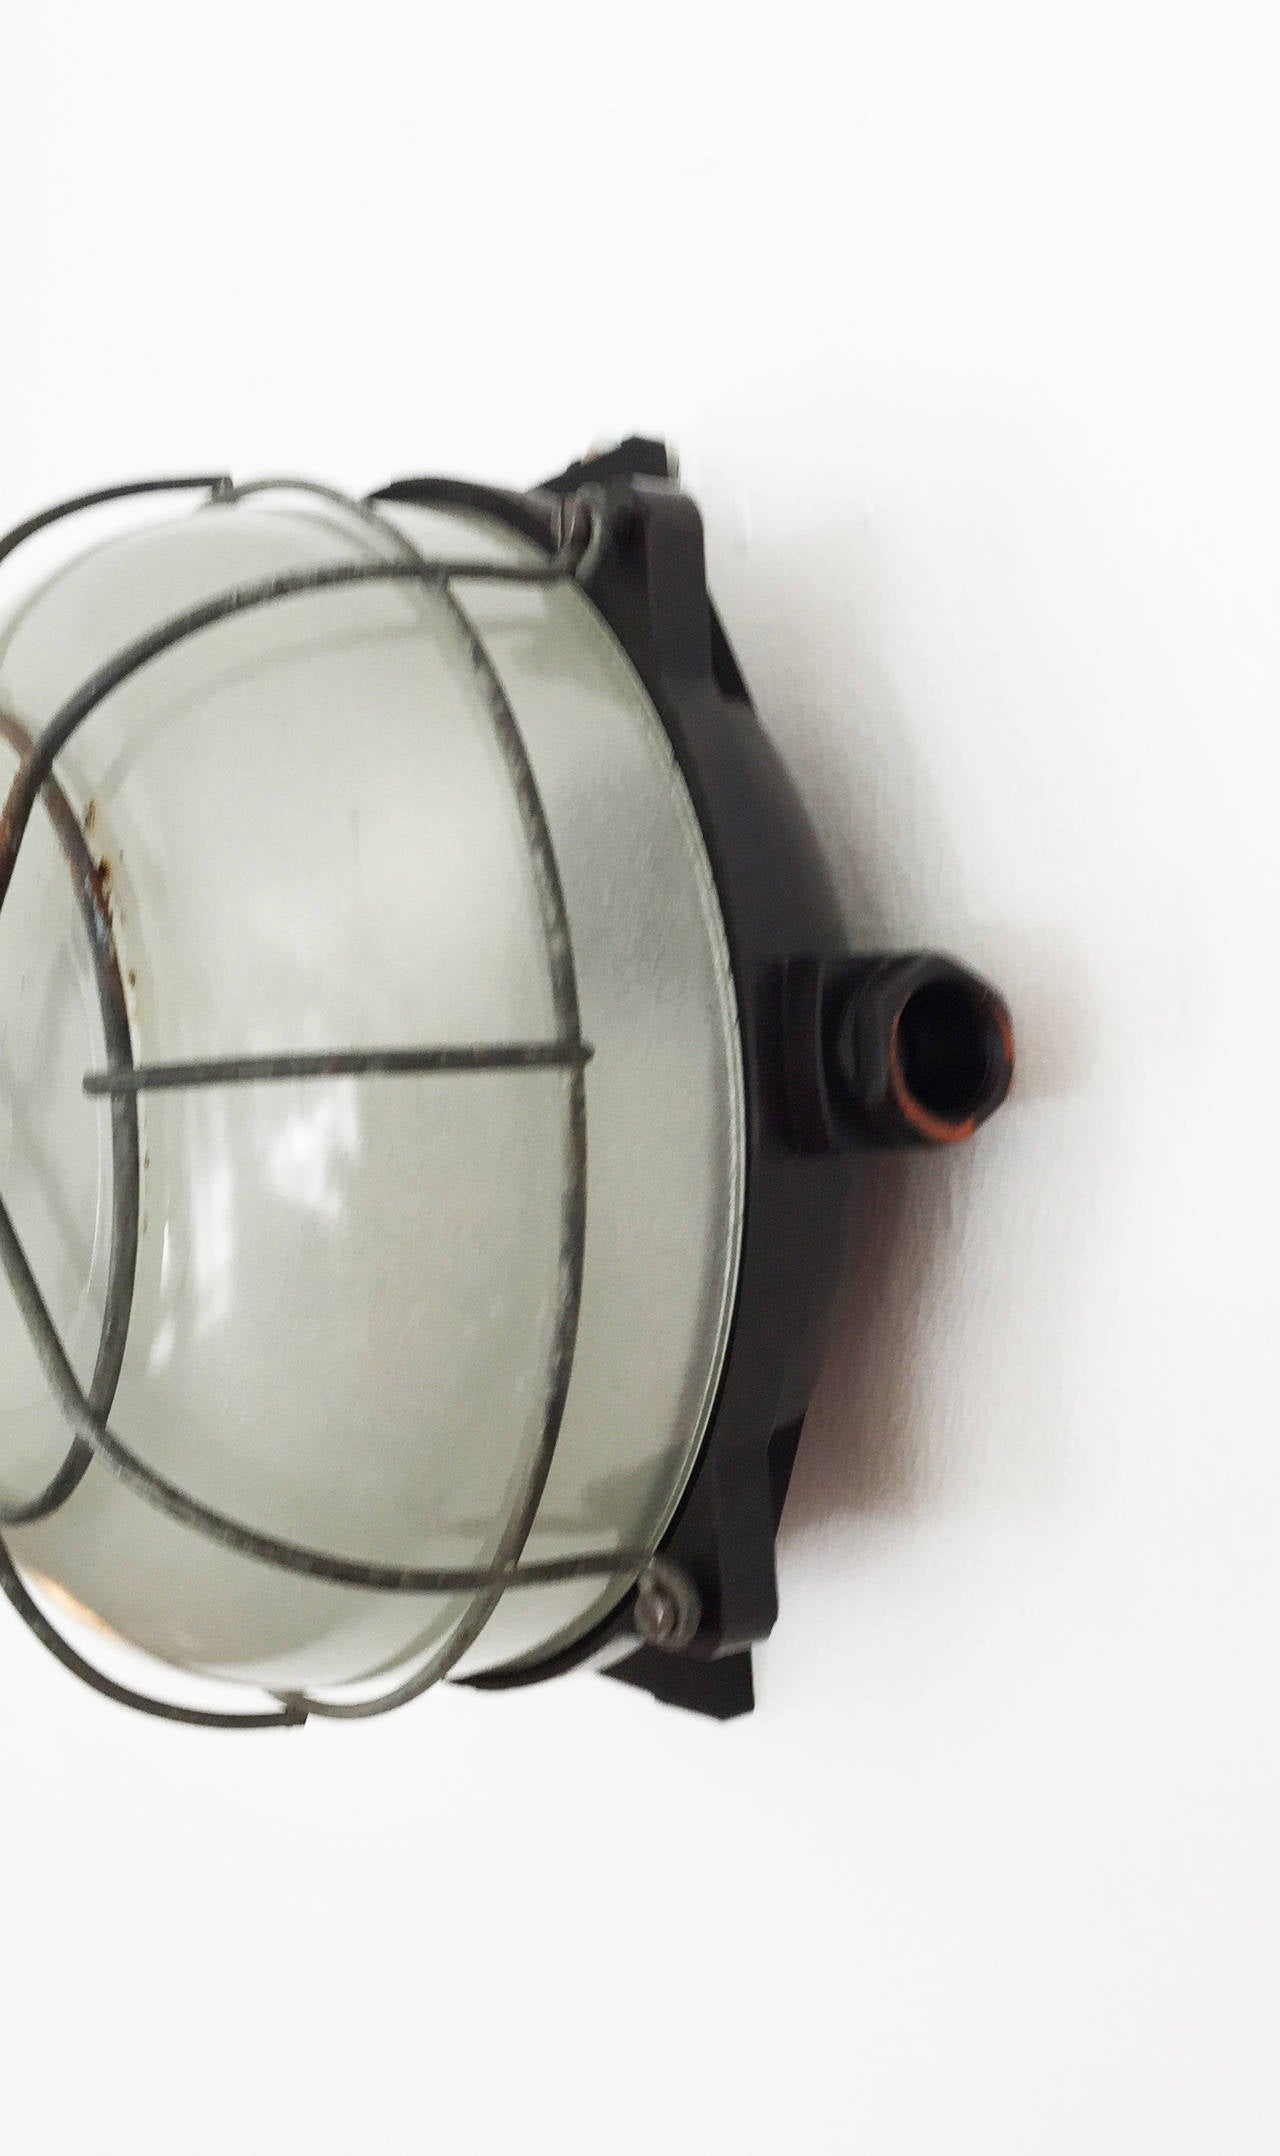 Bauhaus Bakelite Wall or Ceiling Industrial Lamp from 1940s For Sale